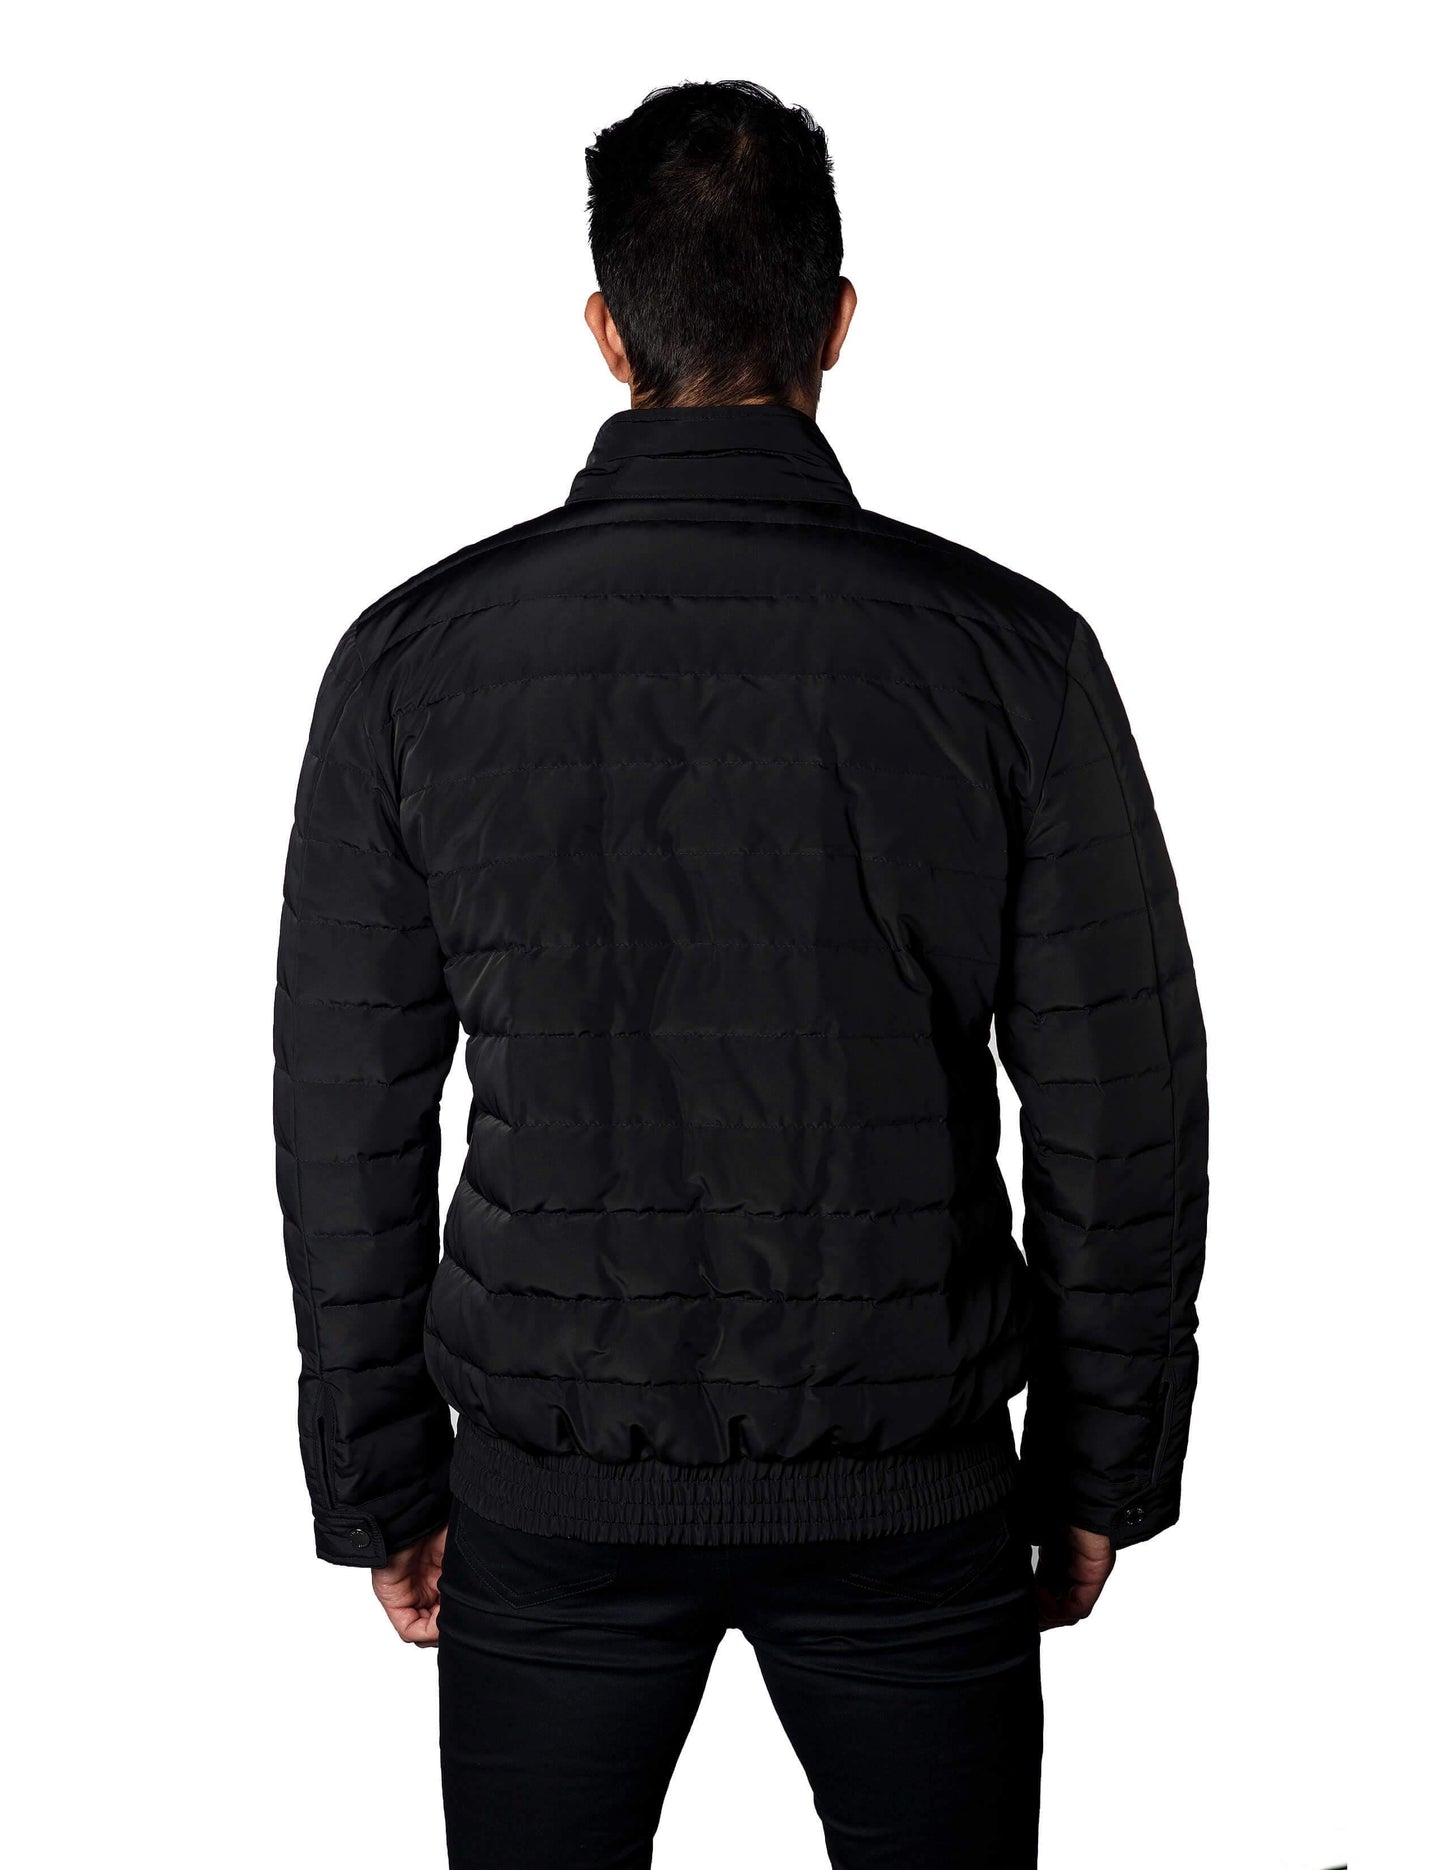 Black Moto Down Quilted Jacket Chicago 2A - Back - Jared Lang